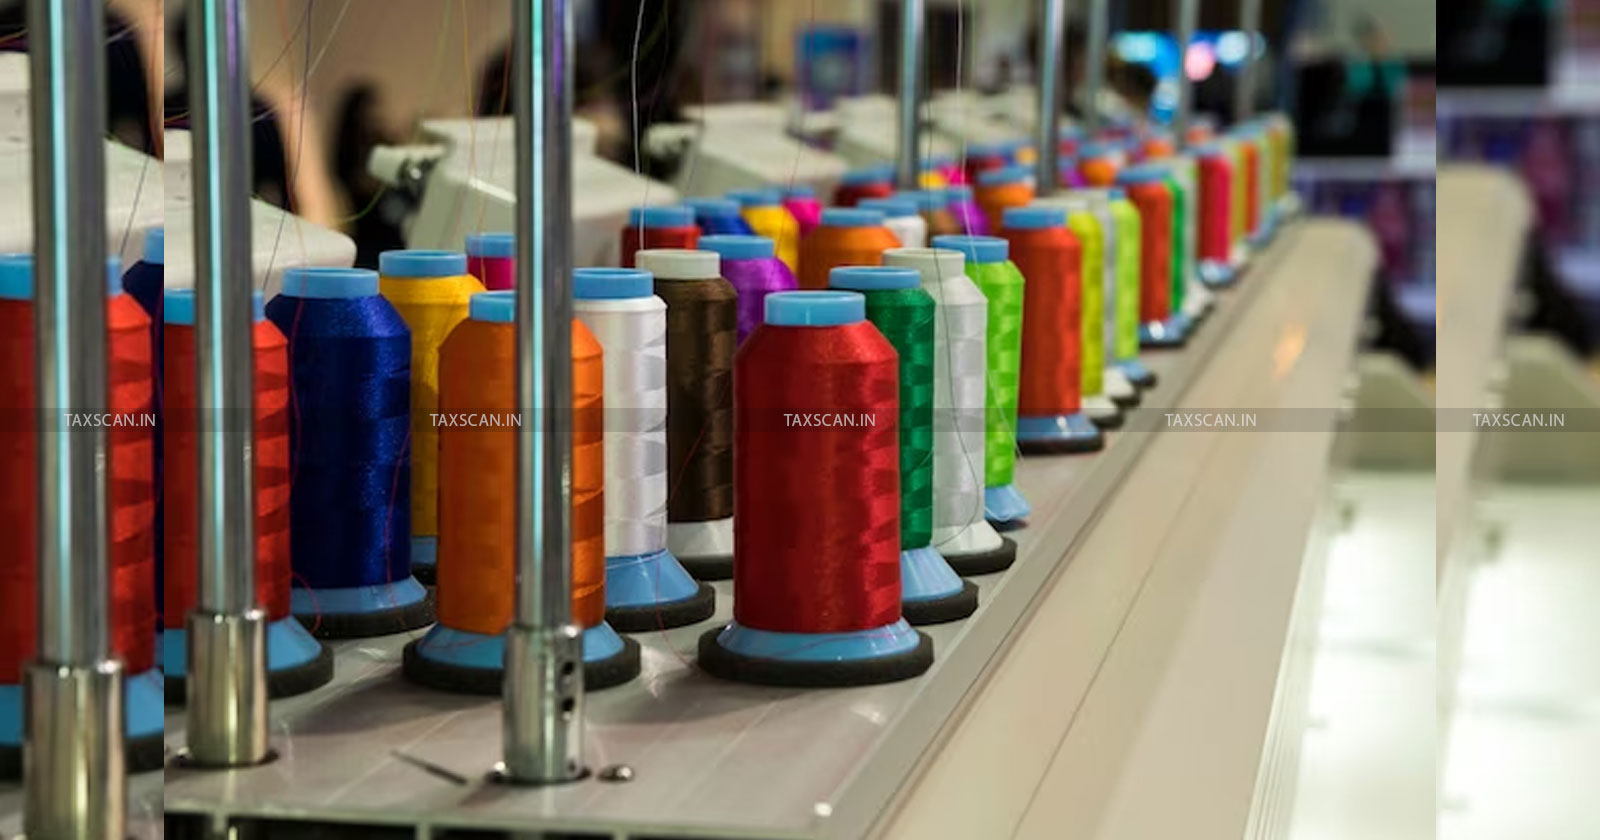 Manufacture of Dyed Yarn - Demand on Manufacture of Dyed Yarn - CESTAT quashes Excise Duty - CESTAT news - Dyed Yarn - taxscan